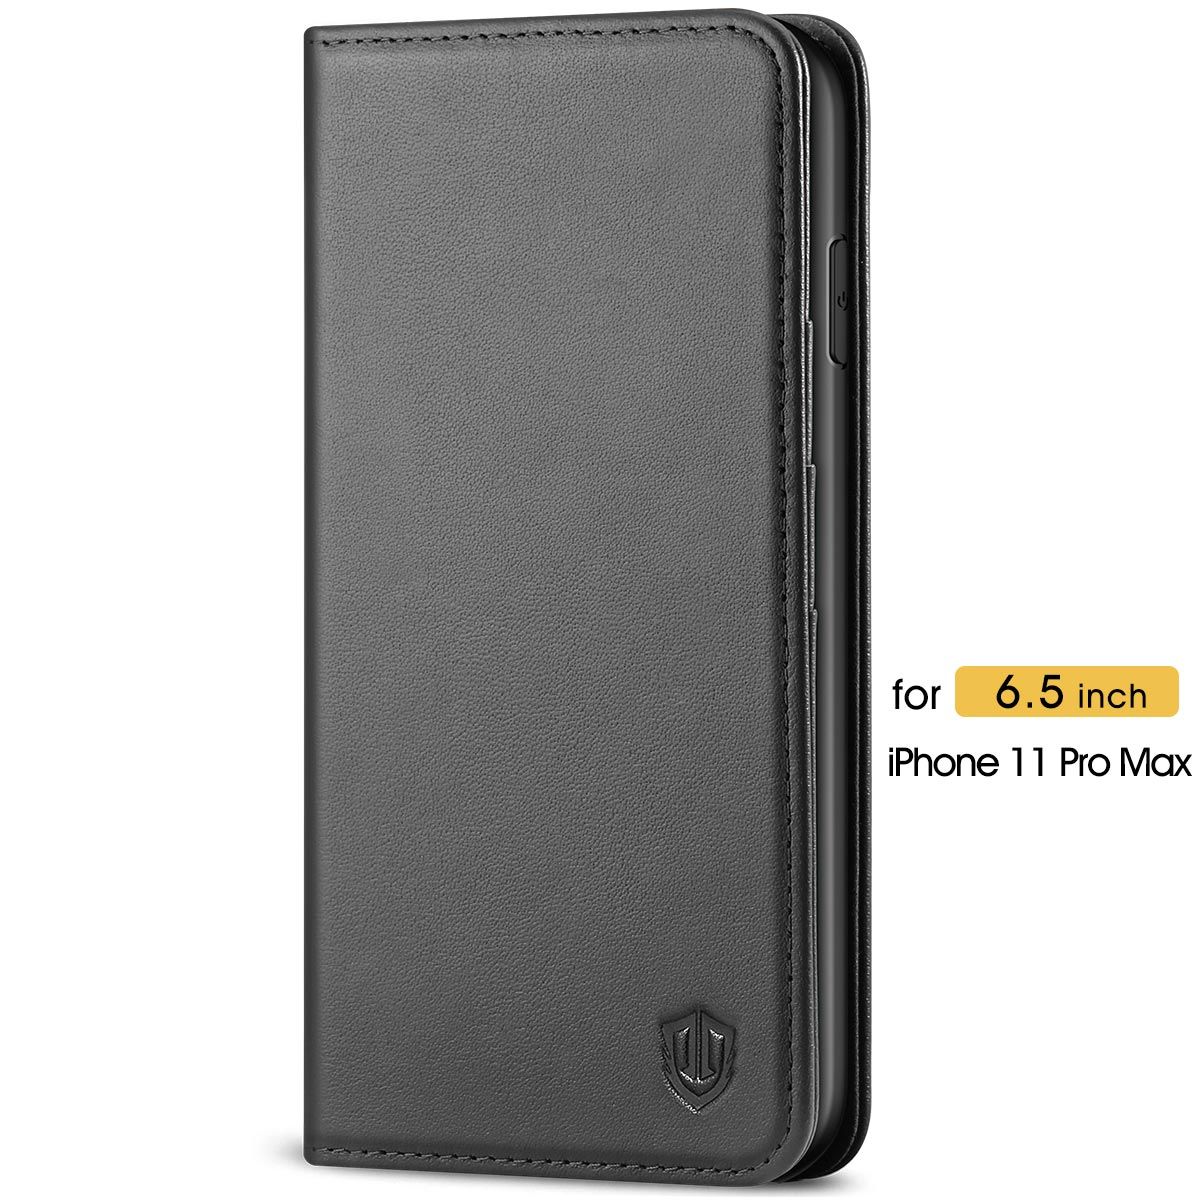 Plantain Leather Cover Wallet for iPhone 11 Pro Max Simple Flip Case Fit for iPhone 11 Pro Max 